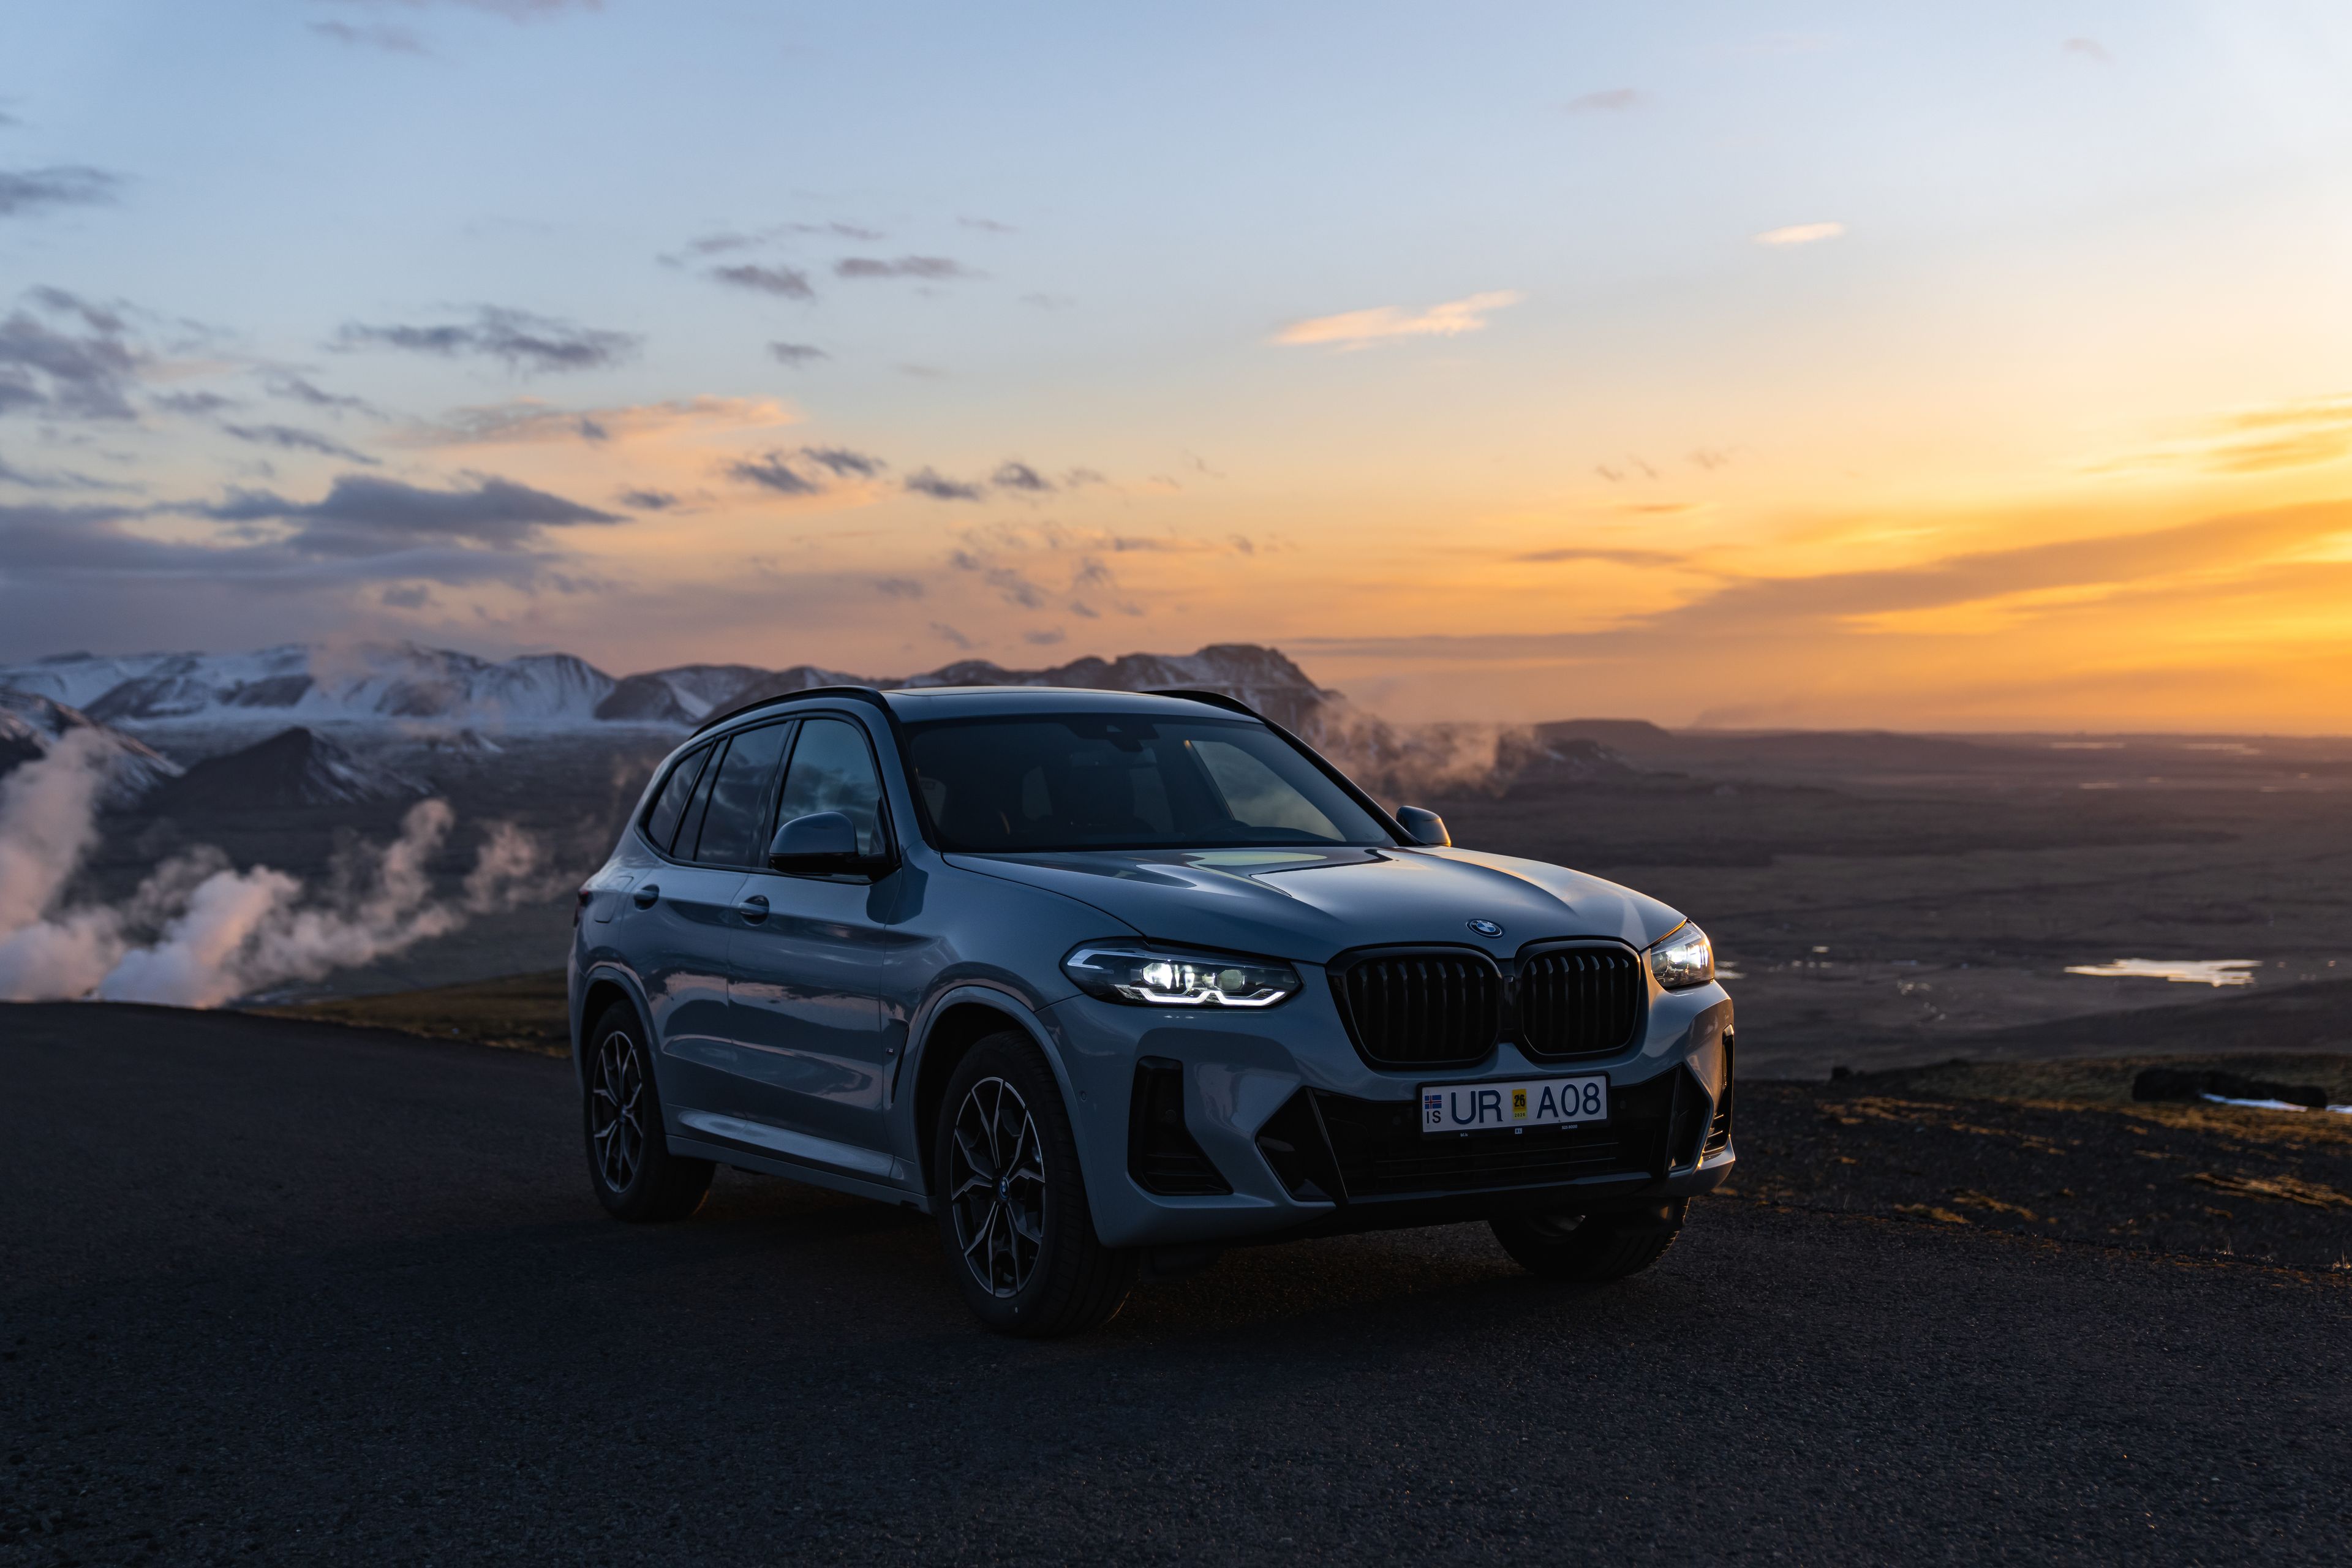 BMW X3 rental car parked against the backdrop of Iceland's stunning landscape